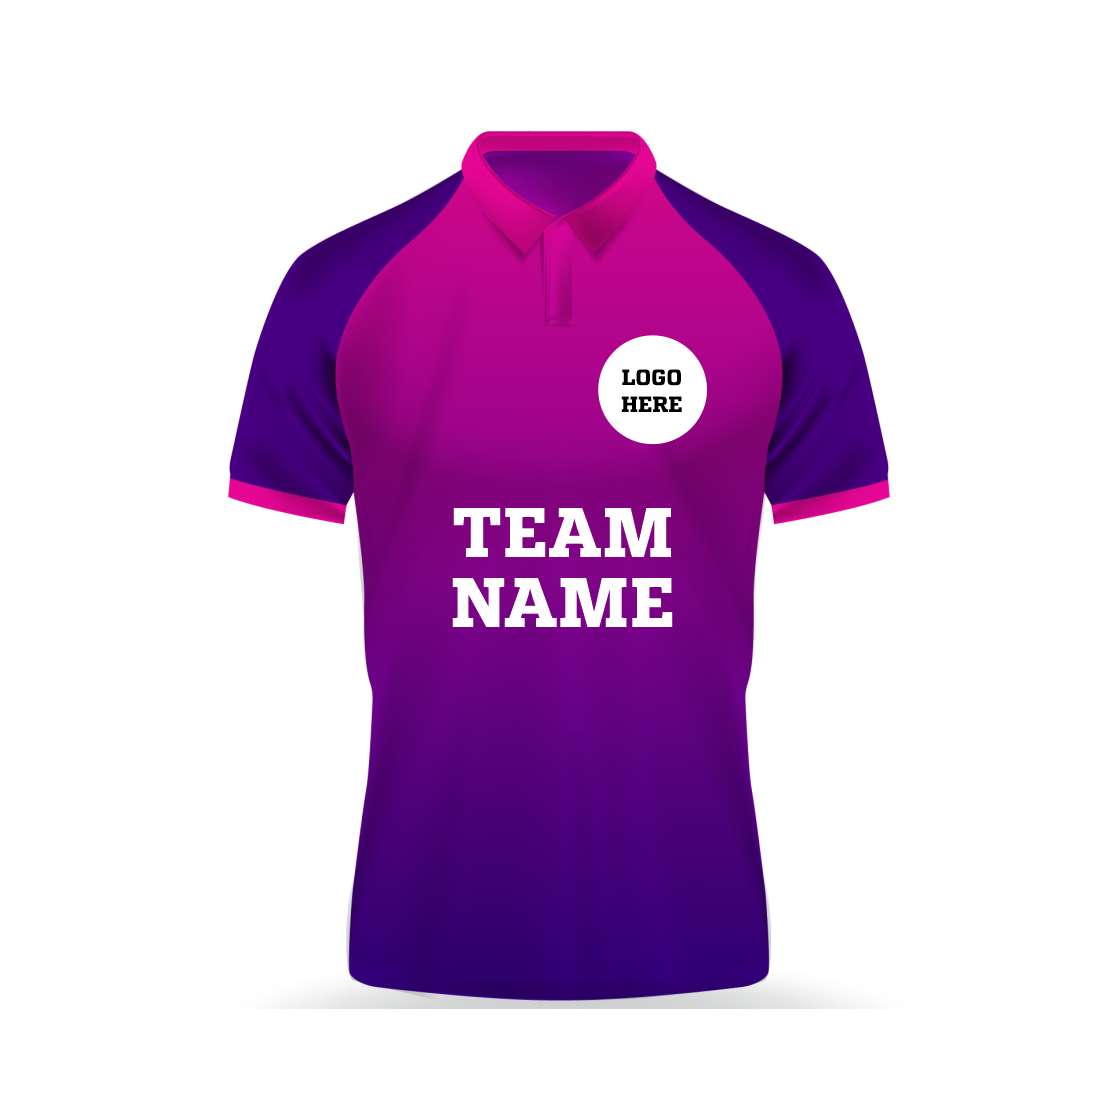 NEXT PRINT Customised Sublimation all Over  Printed T-Shirt Unisex Cricket Sports Jersey Player Name,  Player Number,Team Name and Logo.1875121072